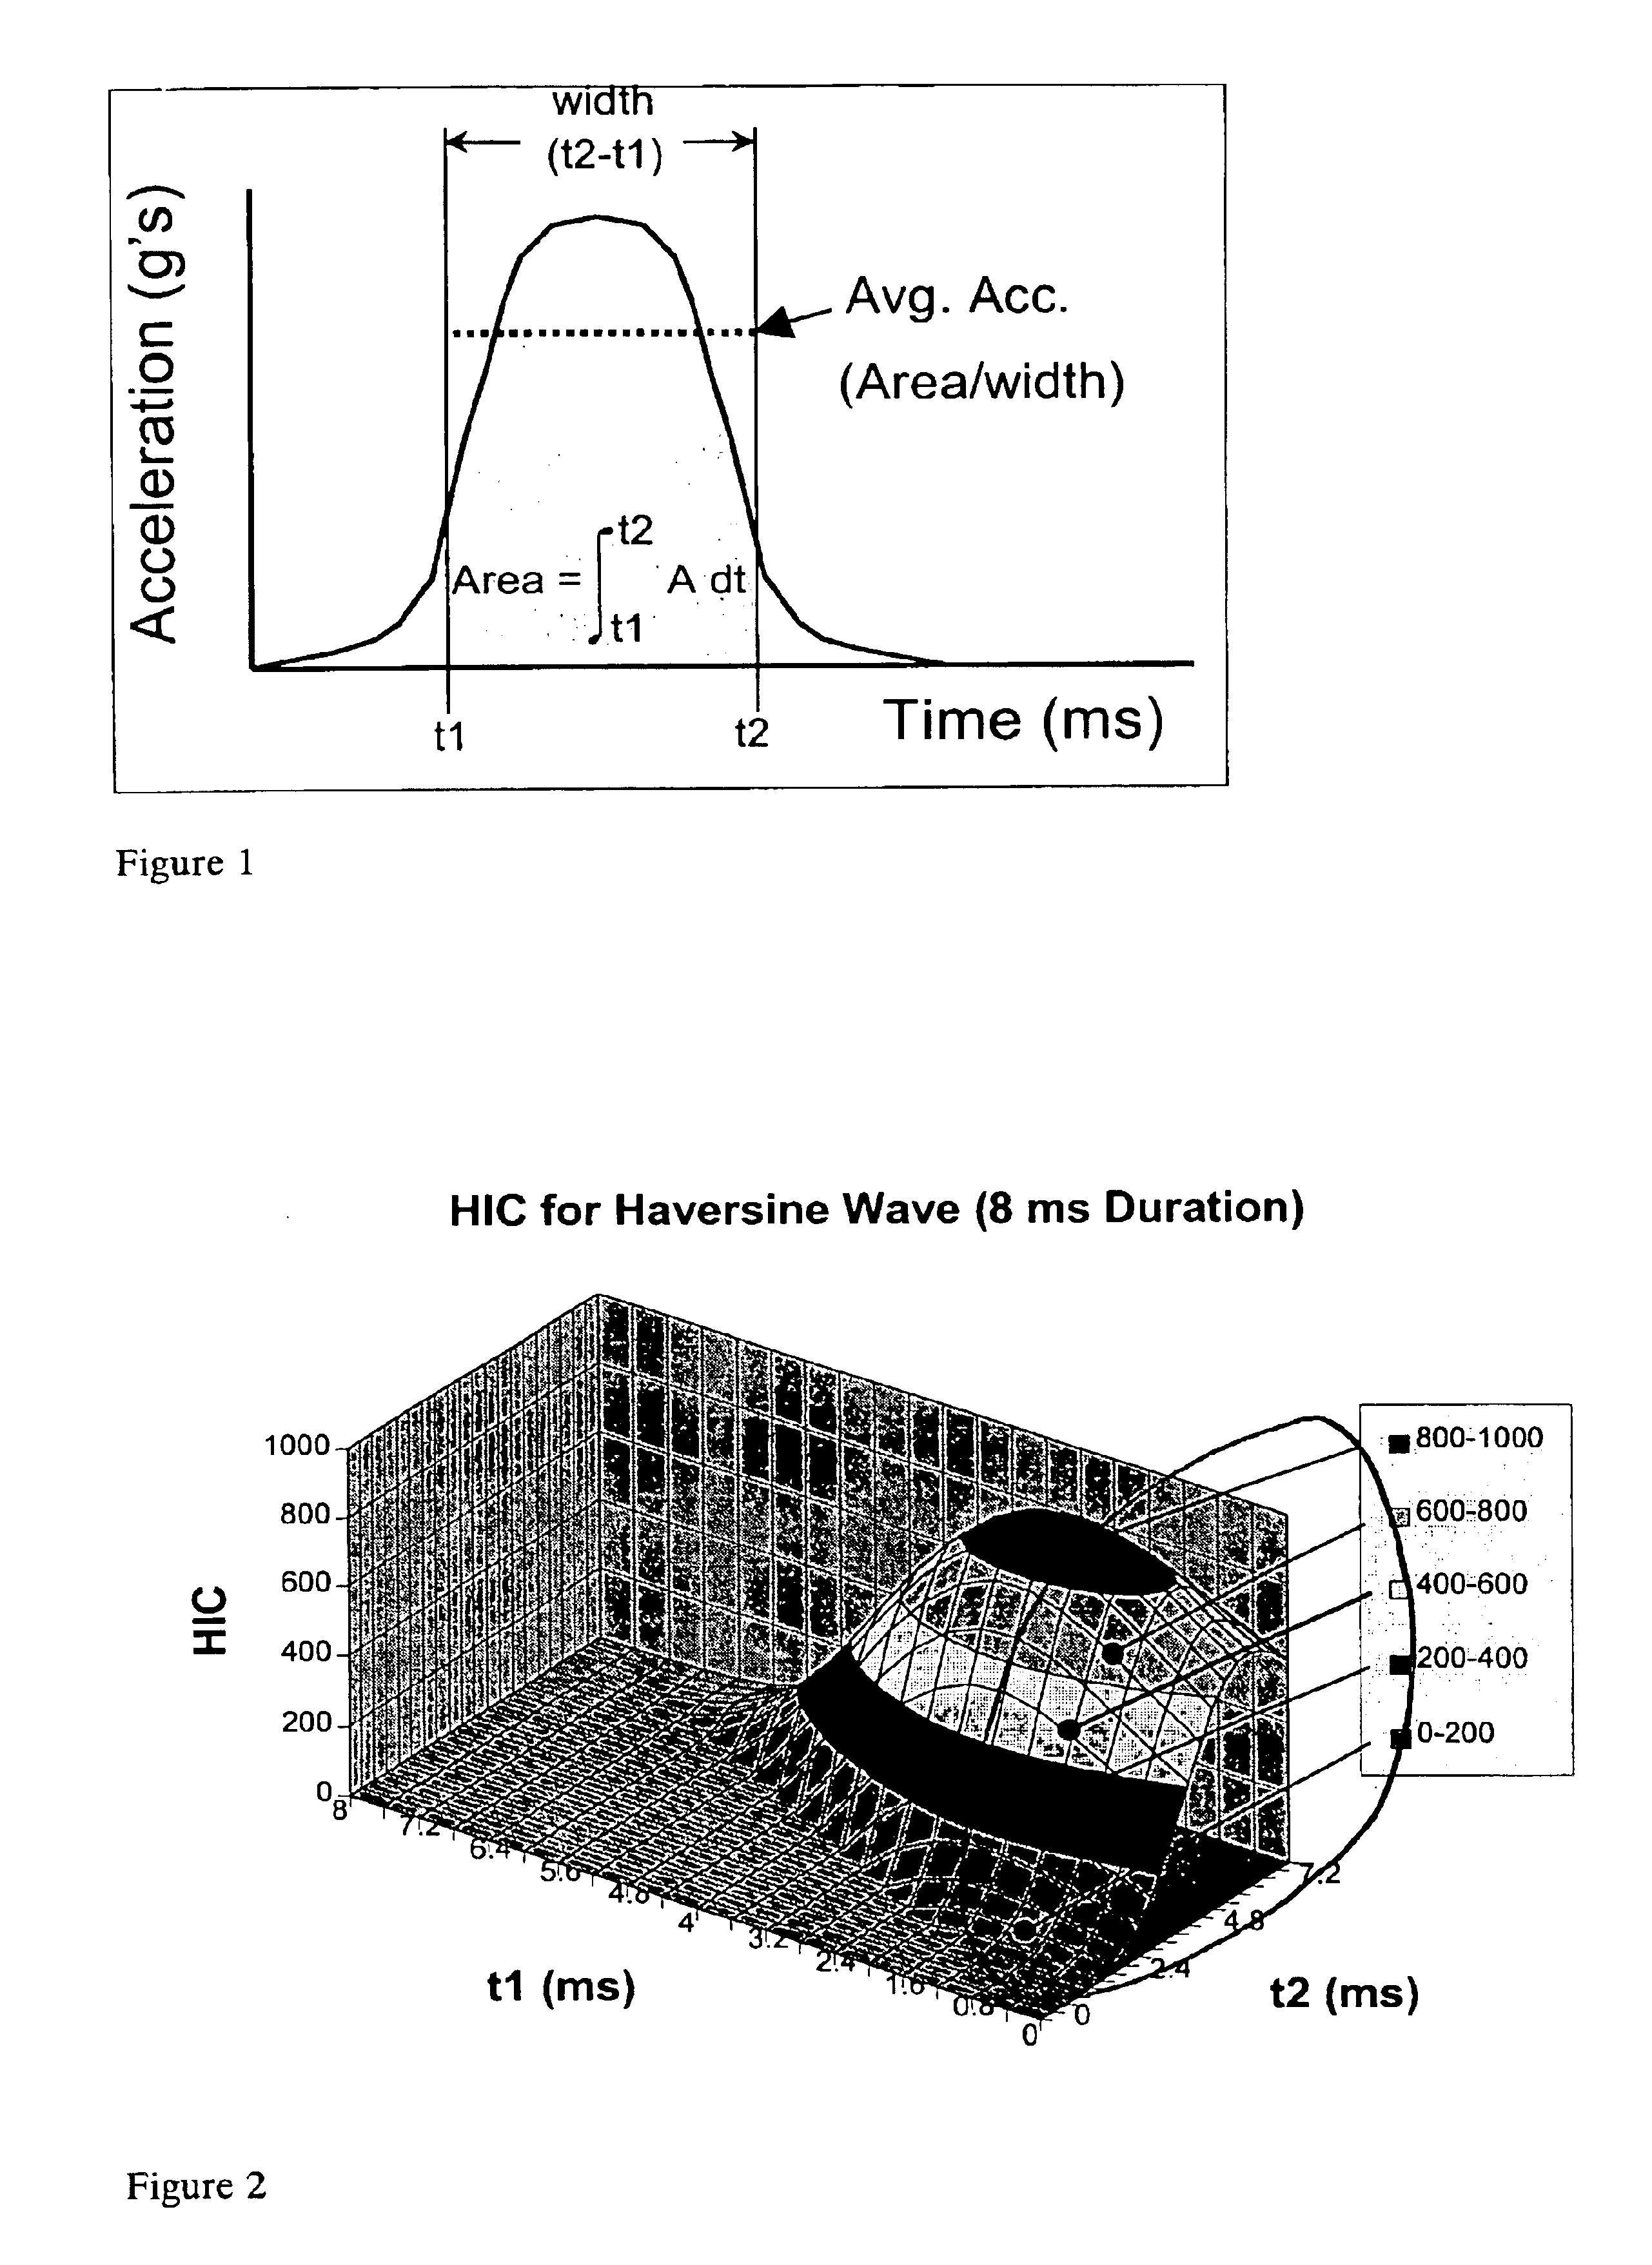 Method for improving the energy absorbing characteristics of automobile components